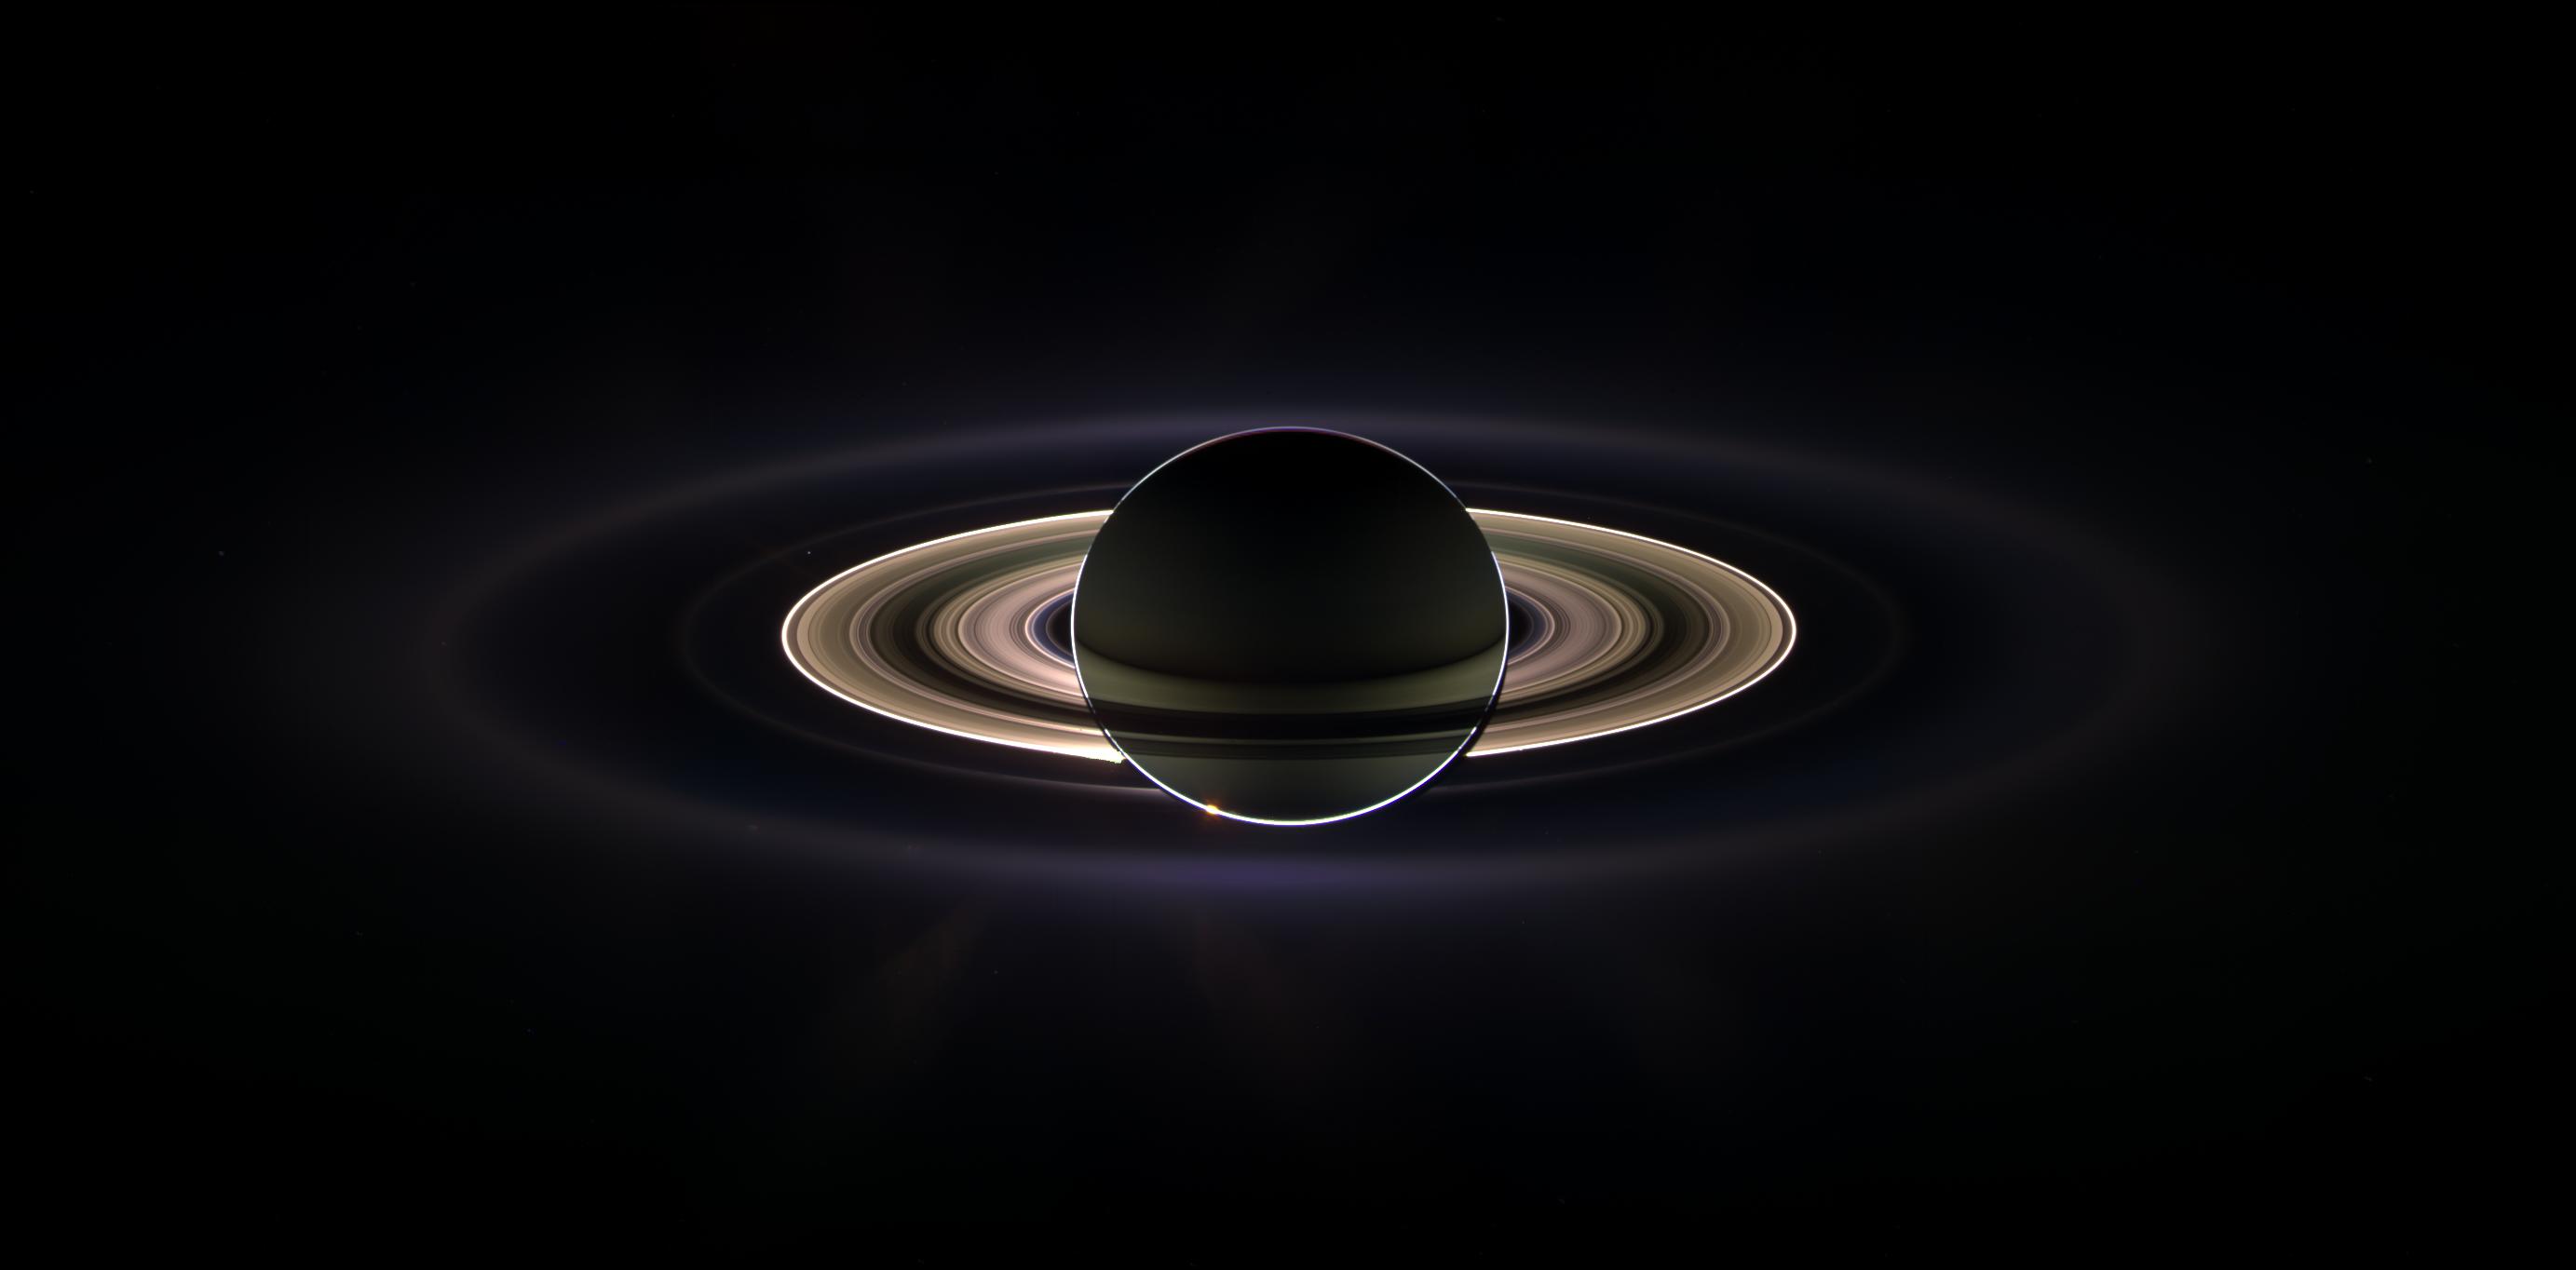 This panoramic was created by combining 165 separate images taken by Cassini's wide-angle camera over a three hour period on September 15, 2006. (NASA / JPL / Space Science Institute.)